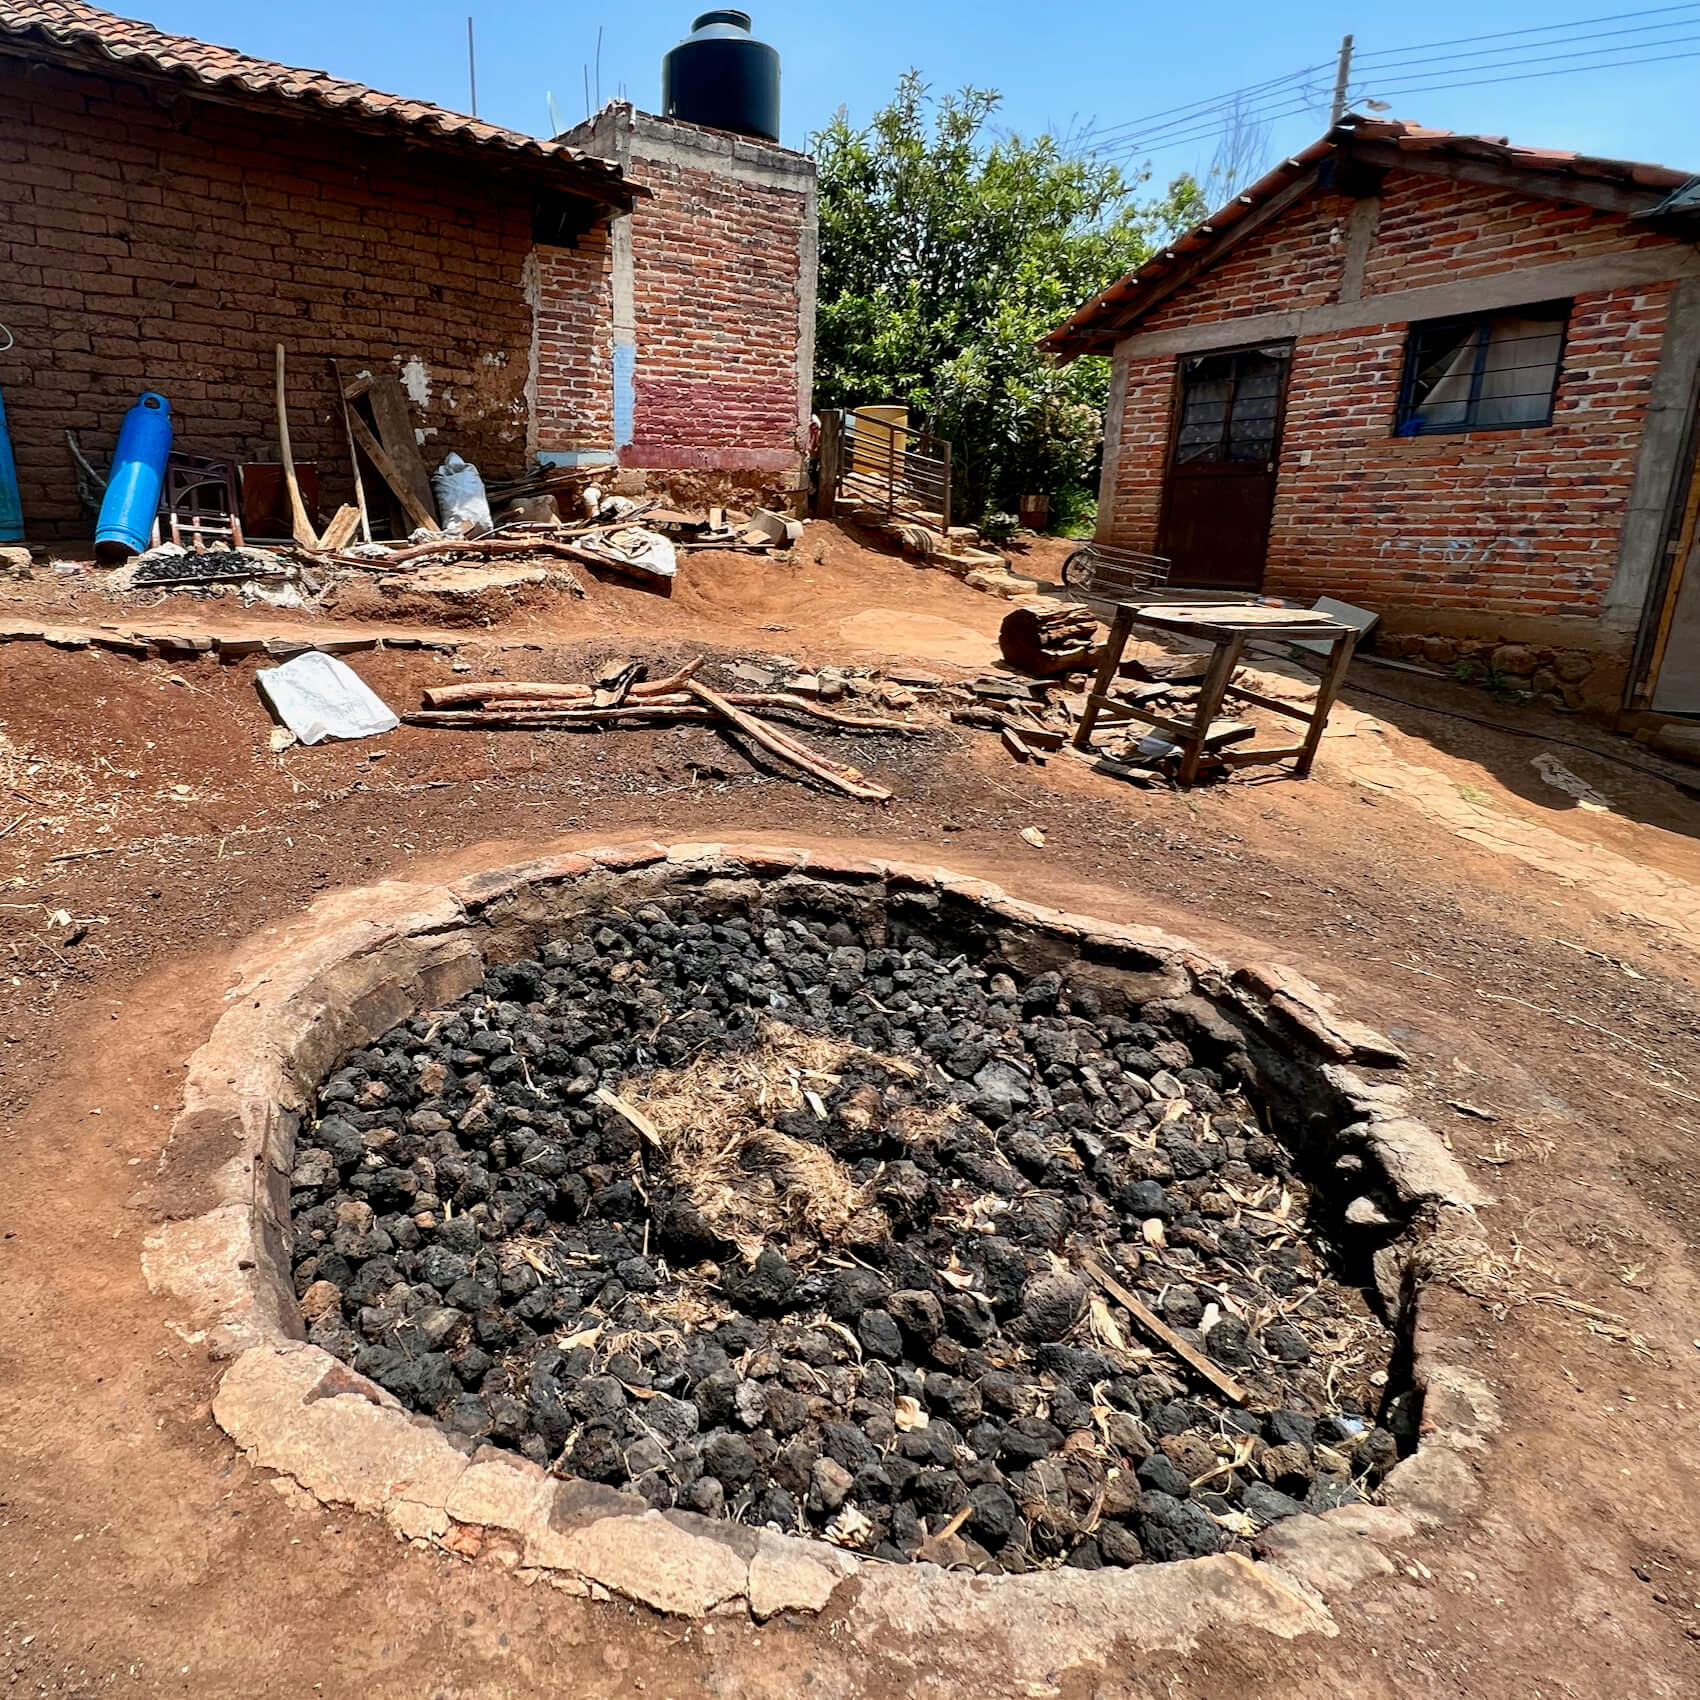 A large round pit filled with black volcanic rock for cooking agave